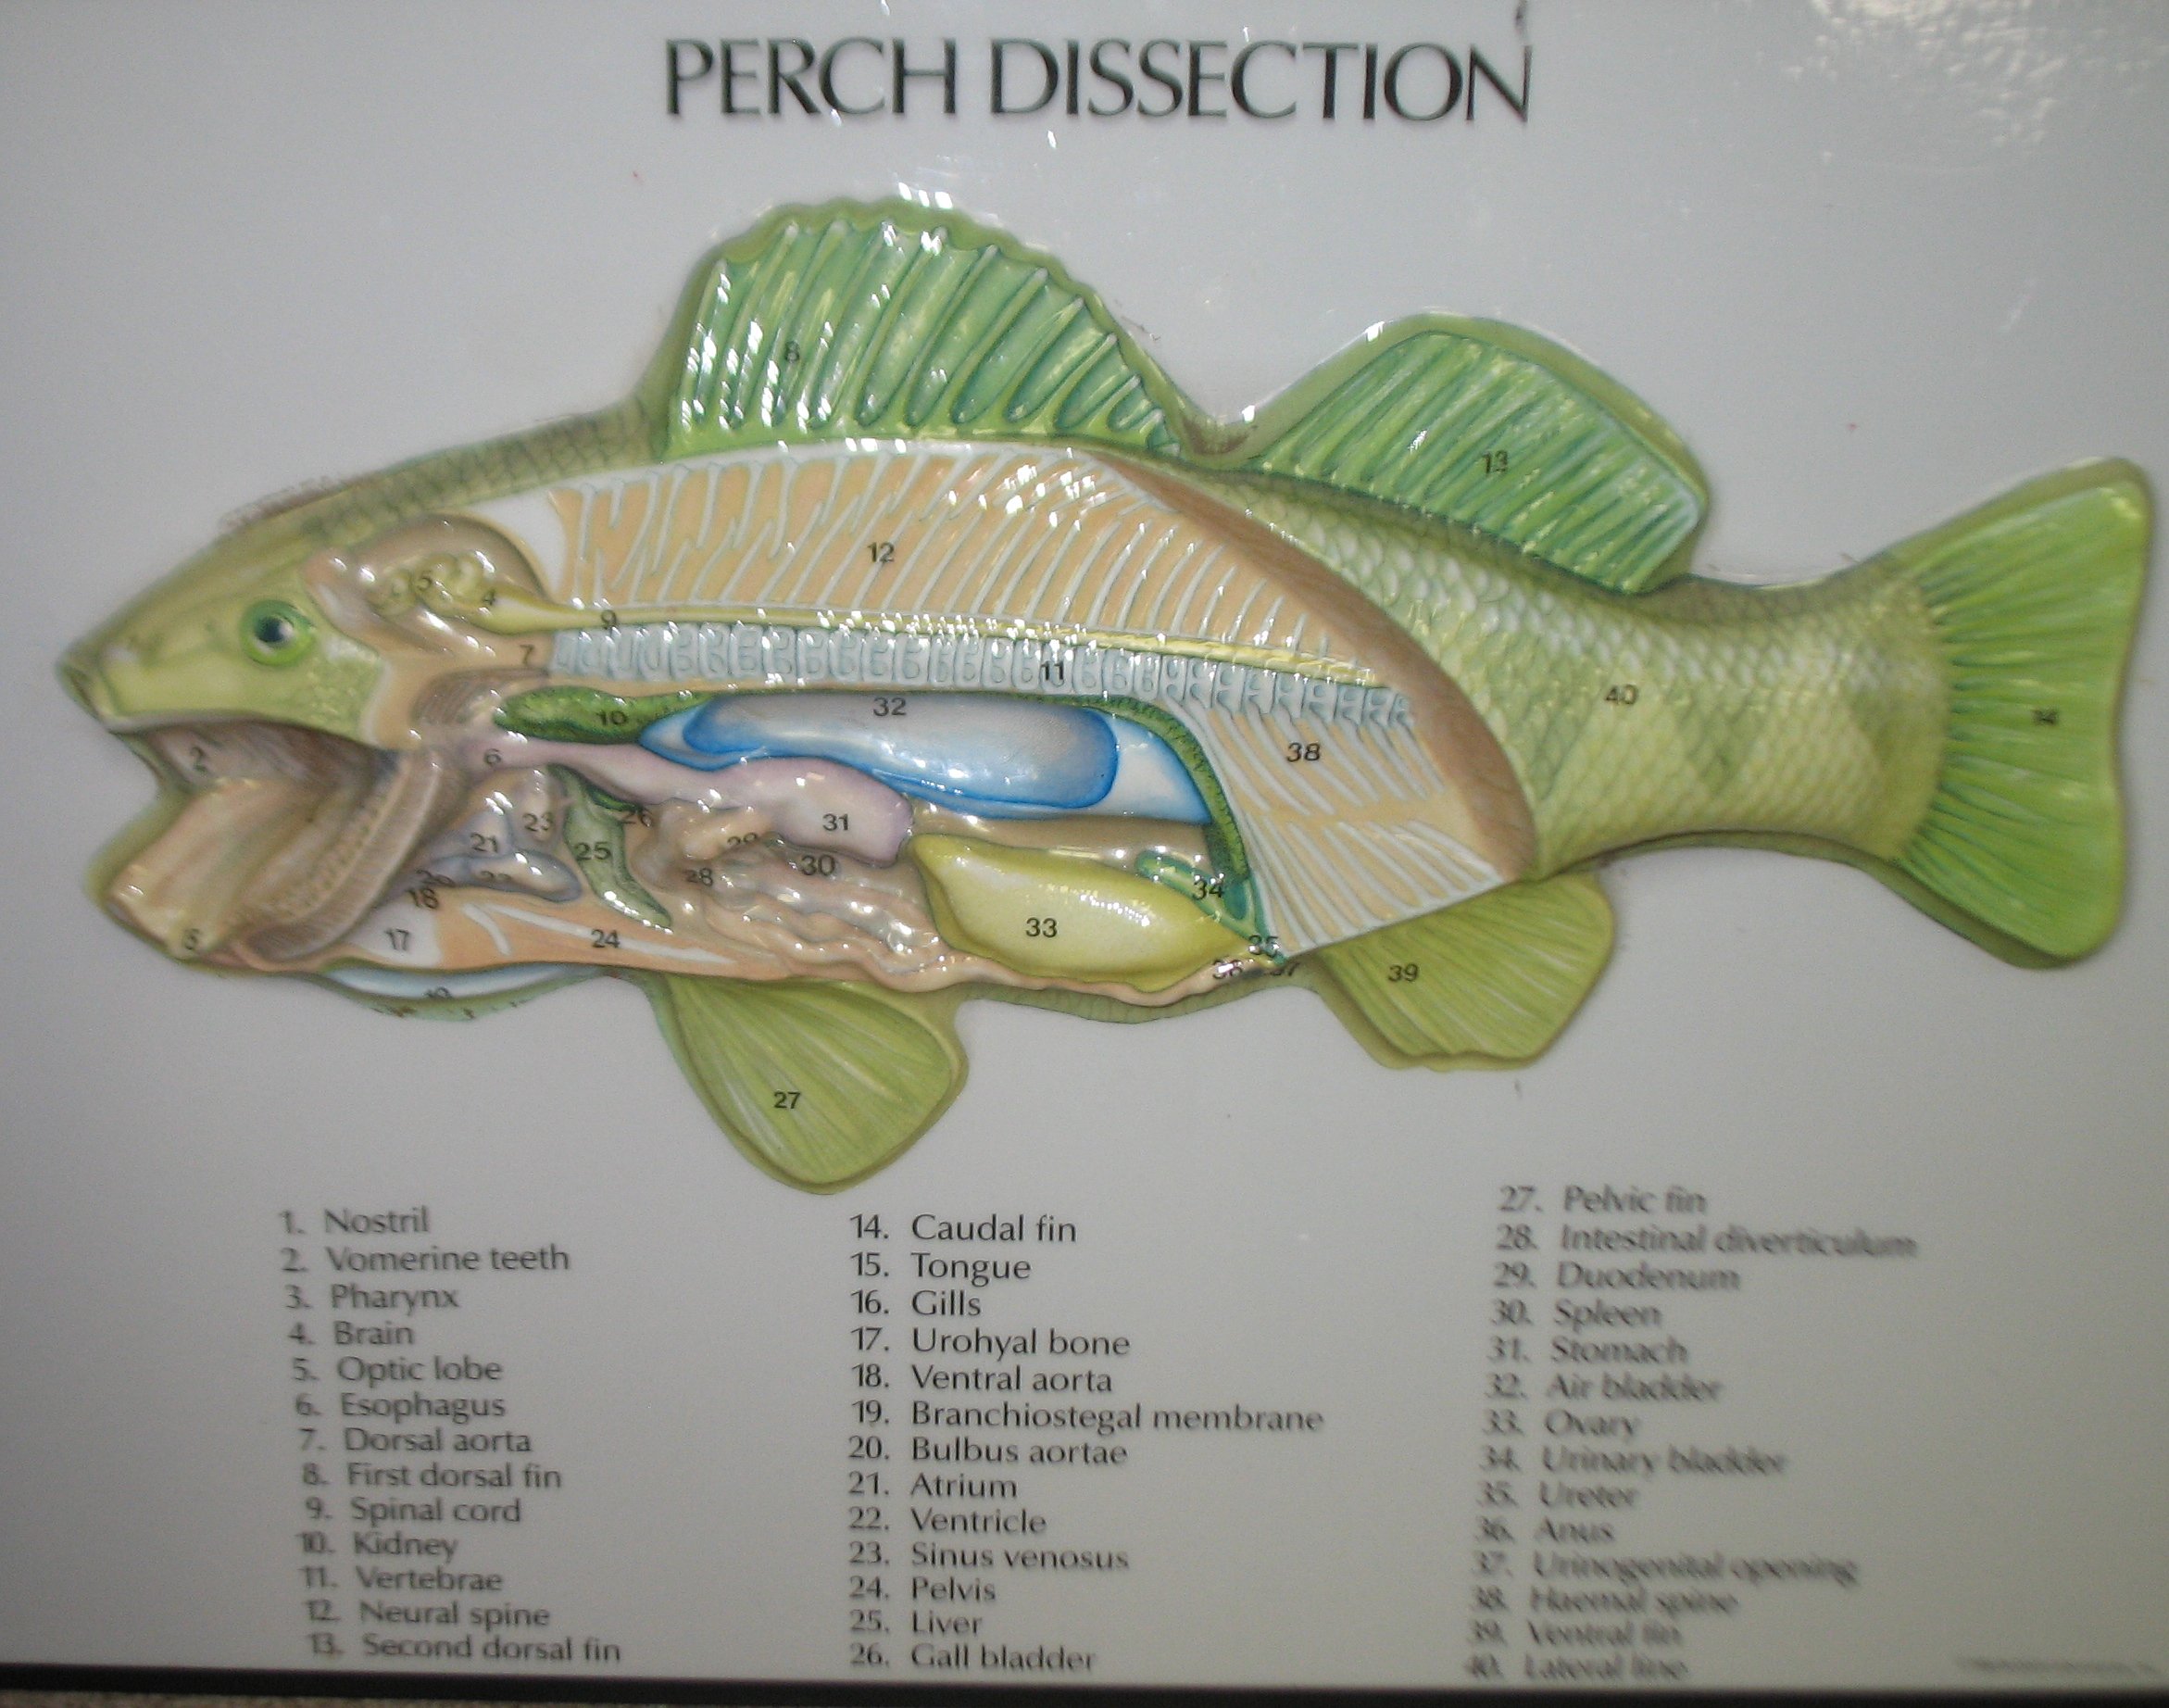 Perch dissection reference. 